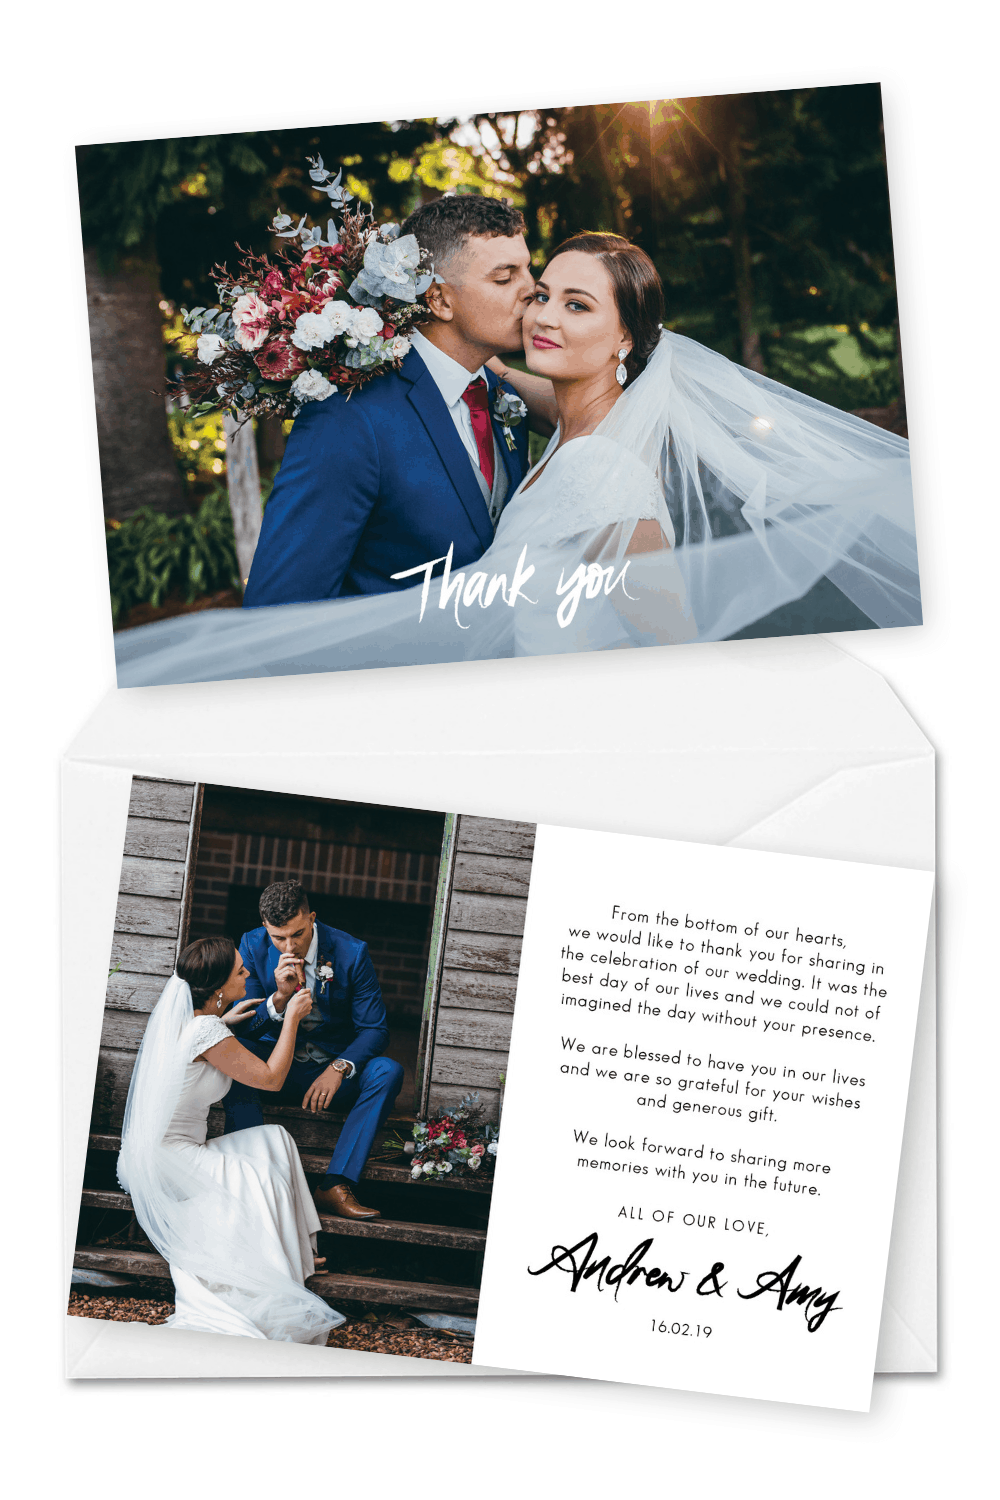 Wedding Thank You Cards Australia Wedding Thank You Cards Wording For the Love of Stationery